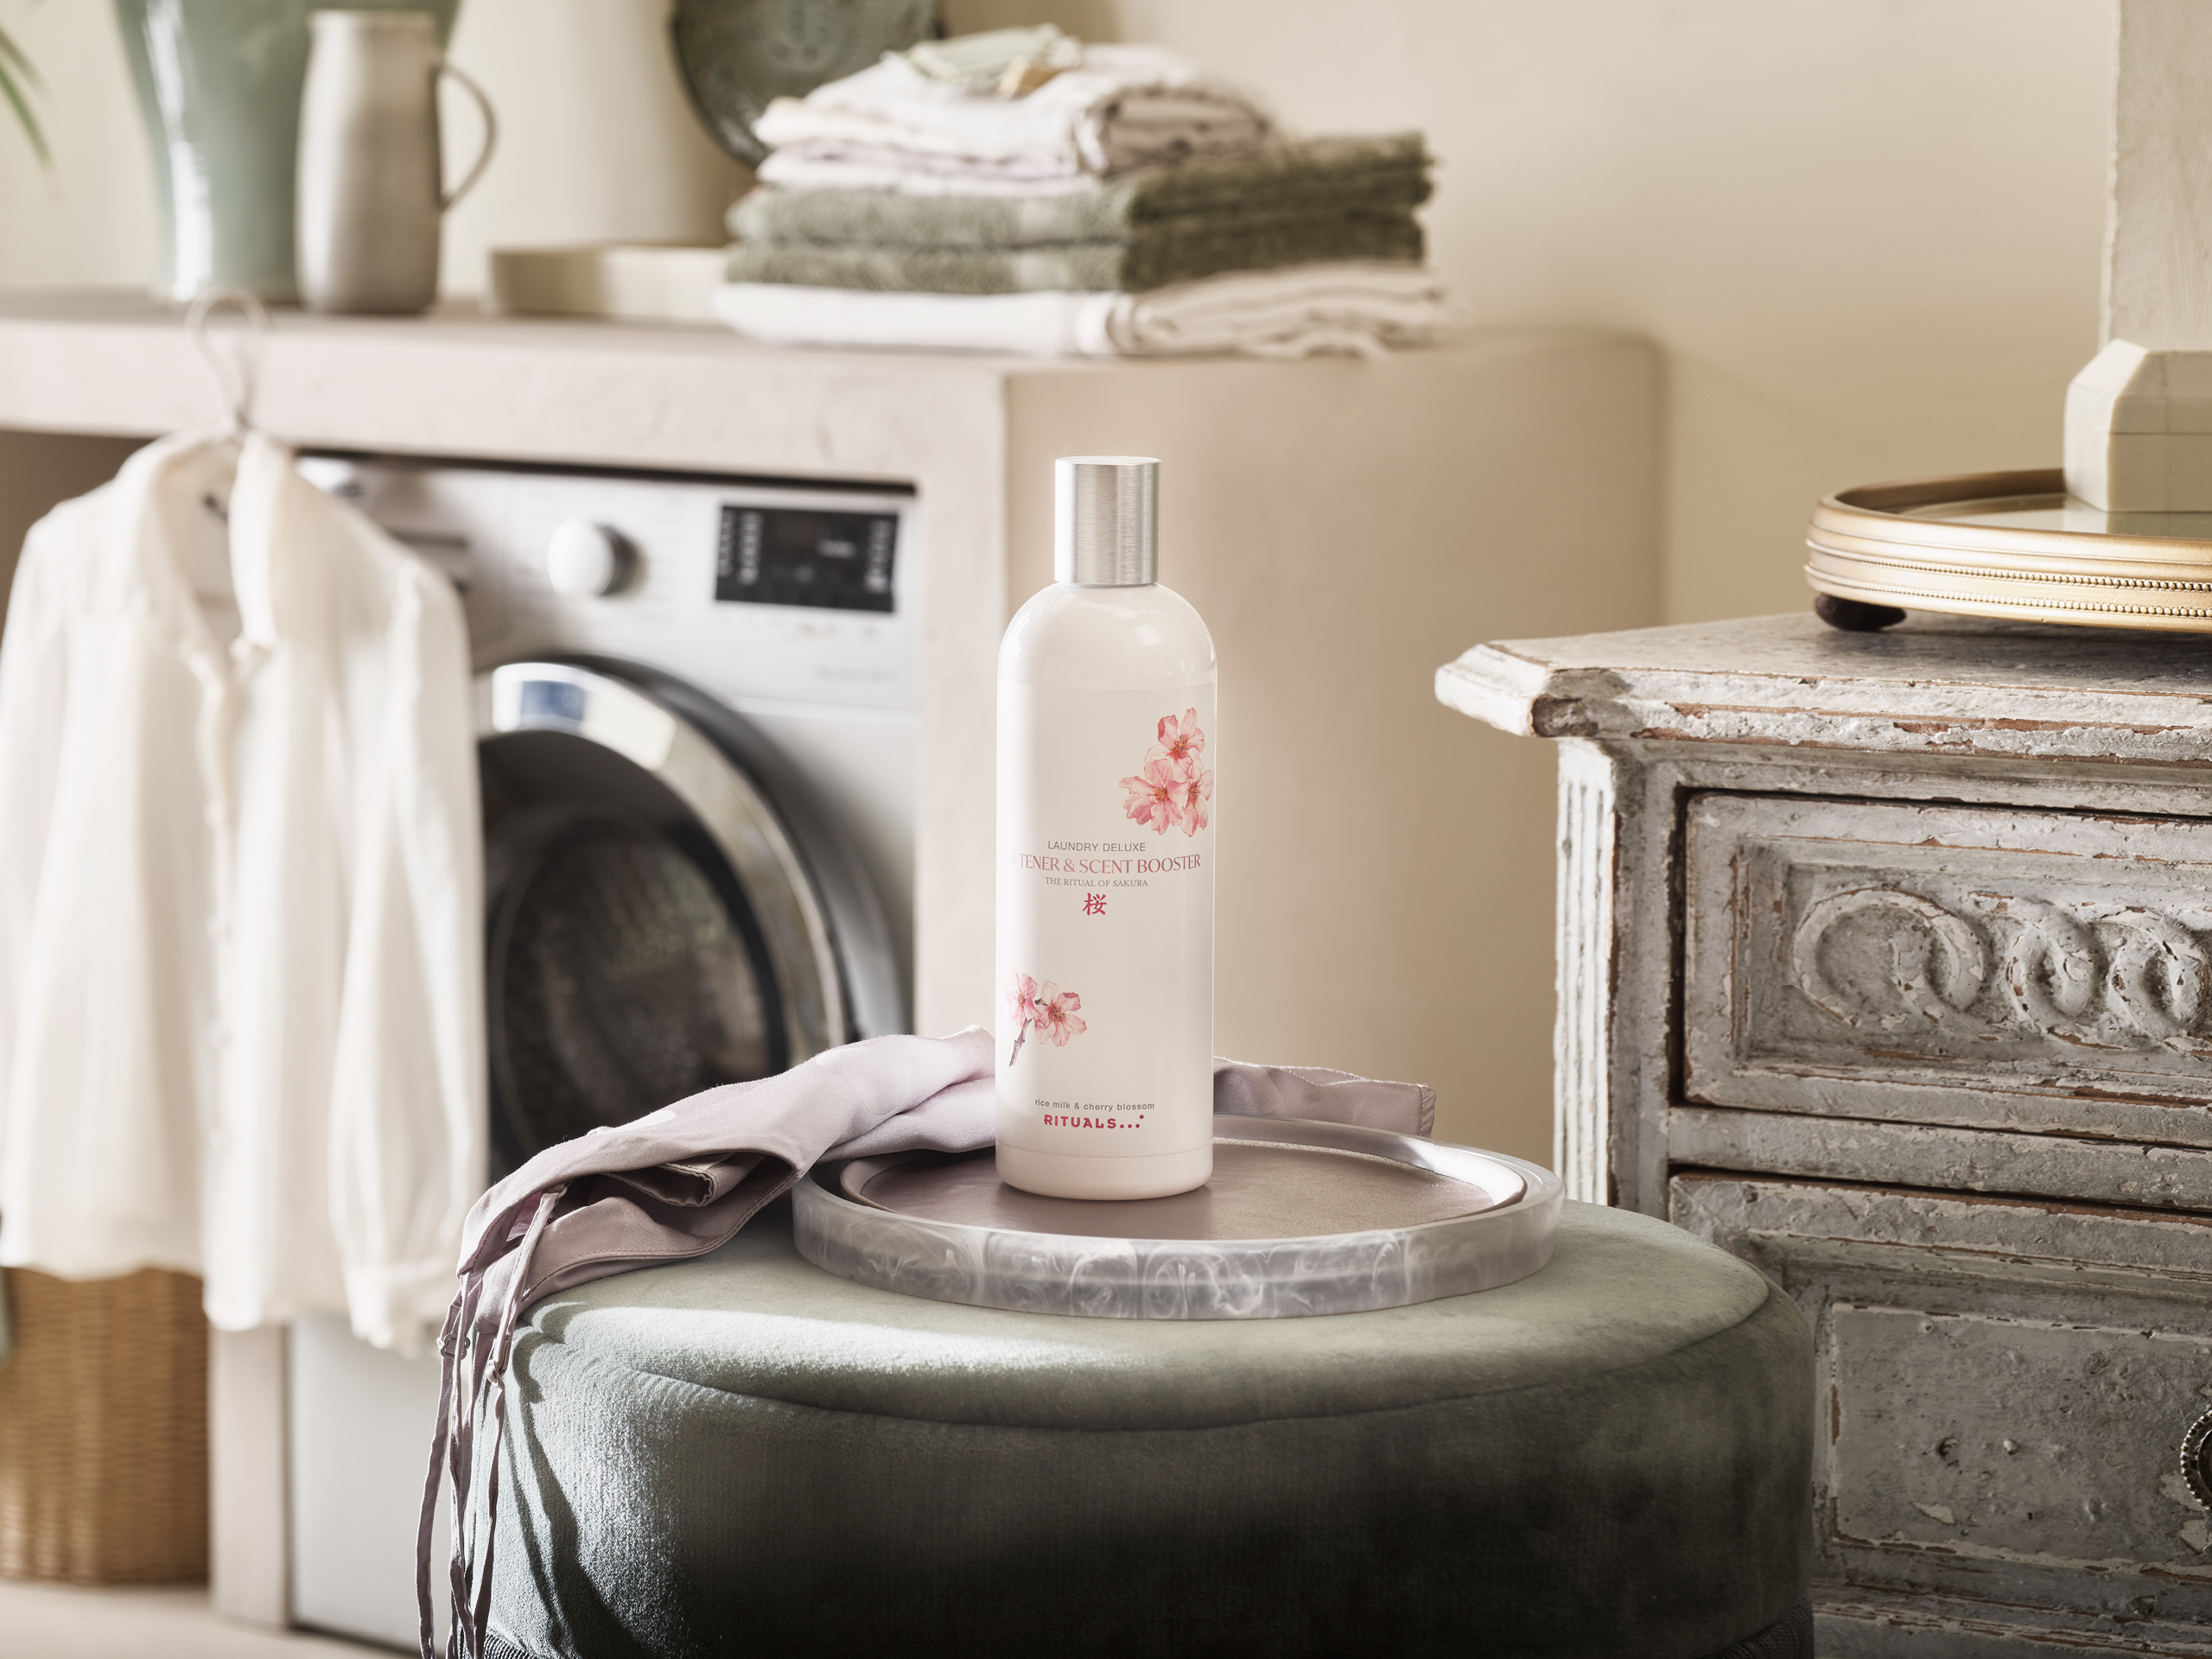 Rituals Laundry Deluxe Softener & Scent Booster